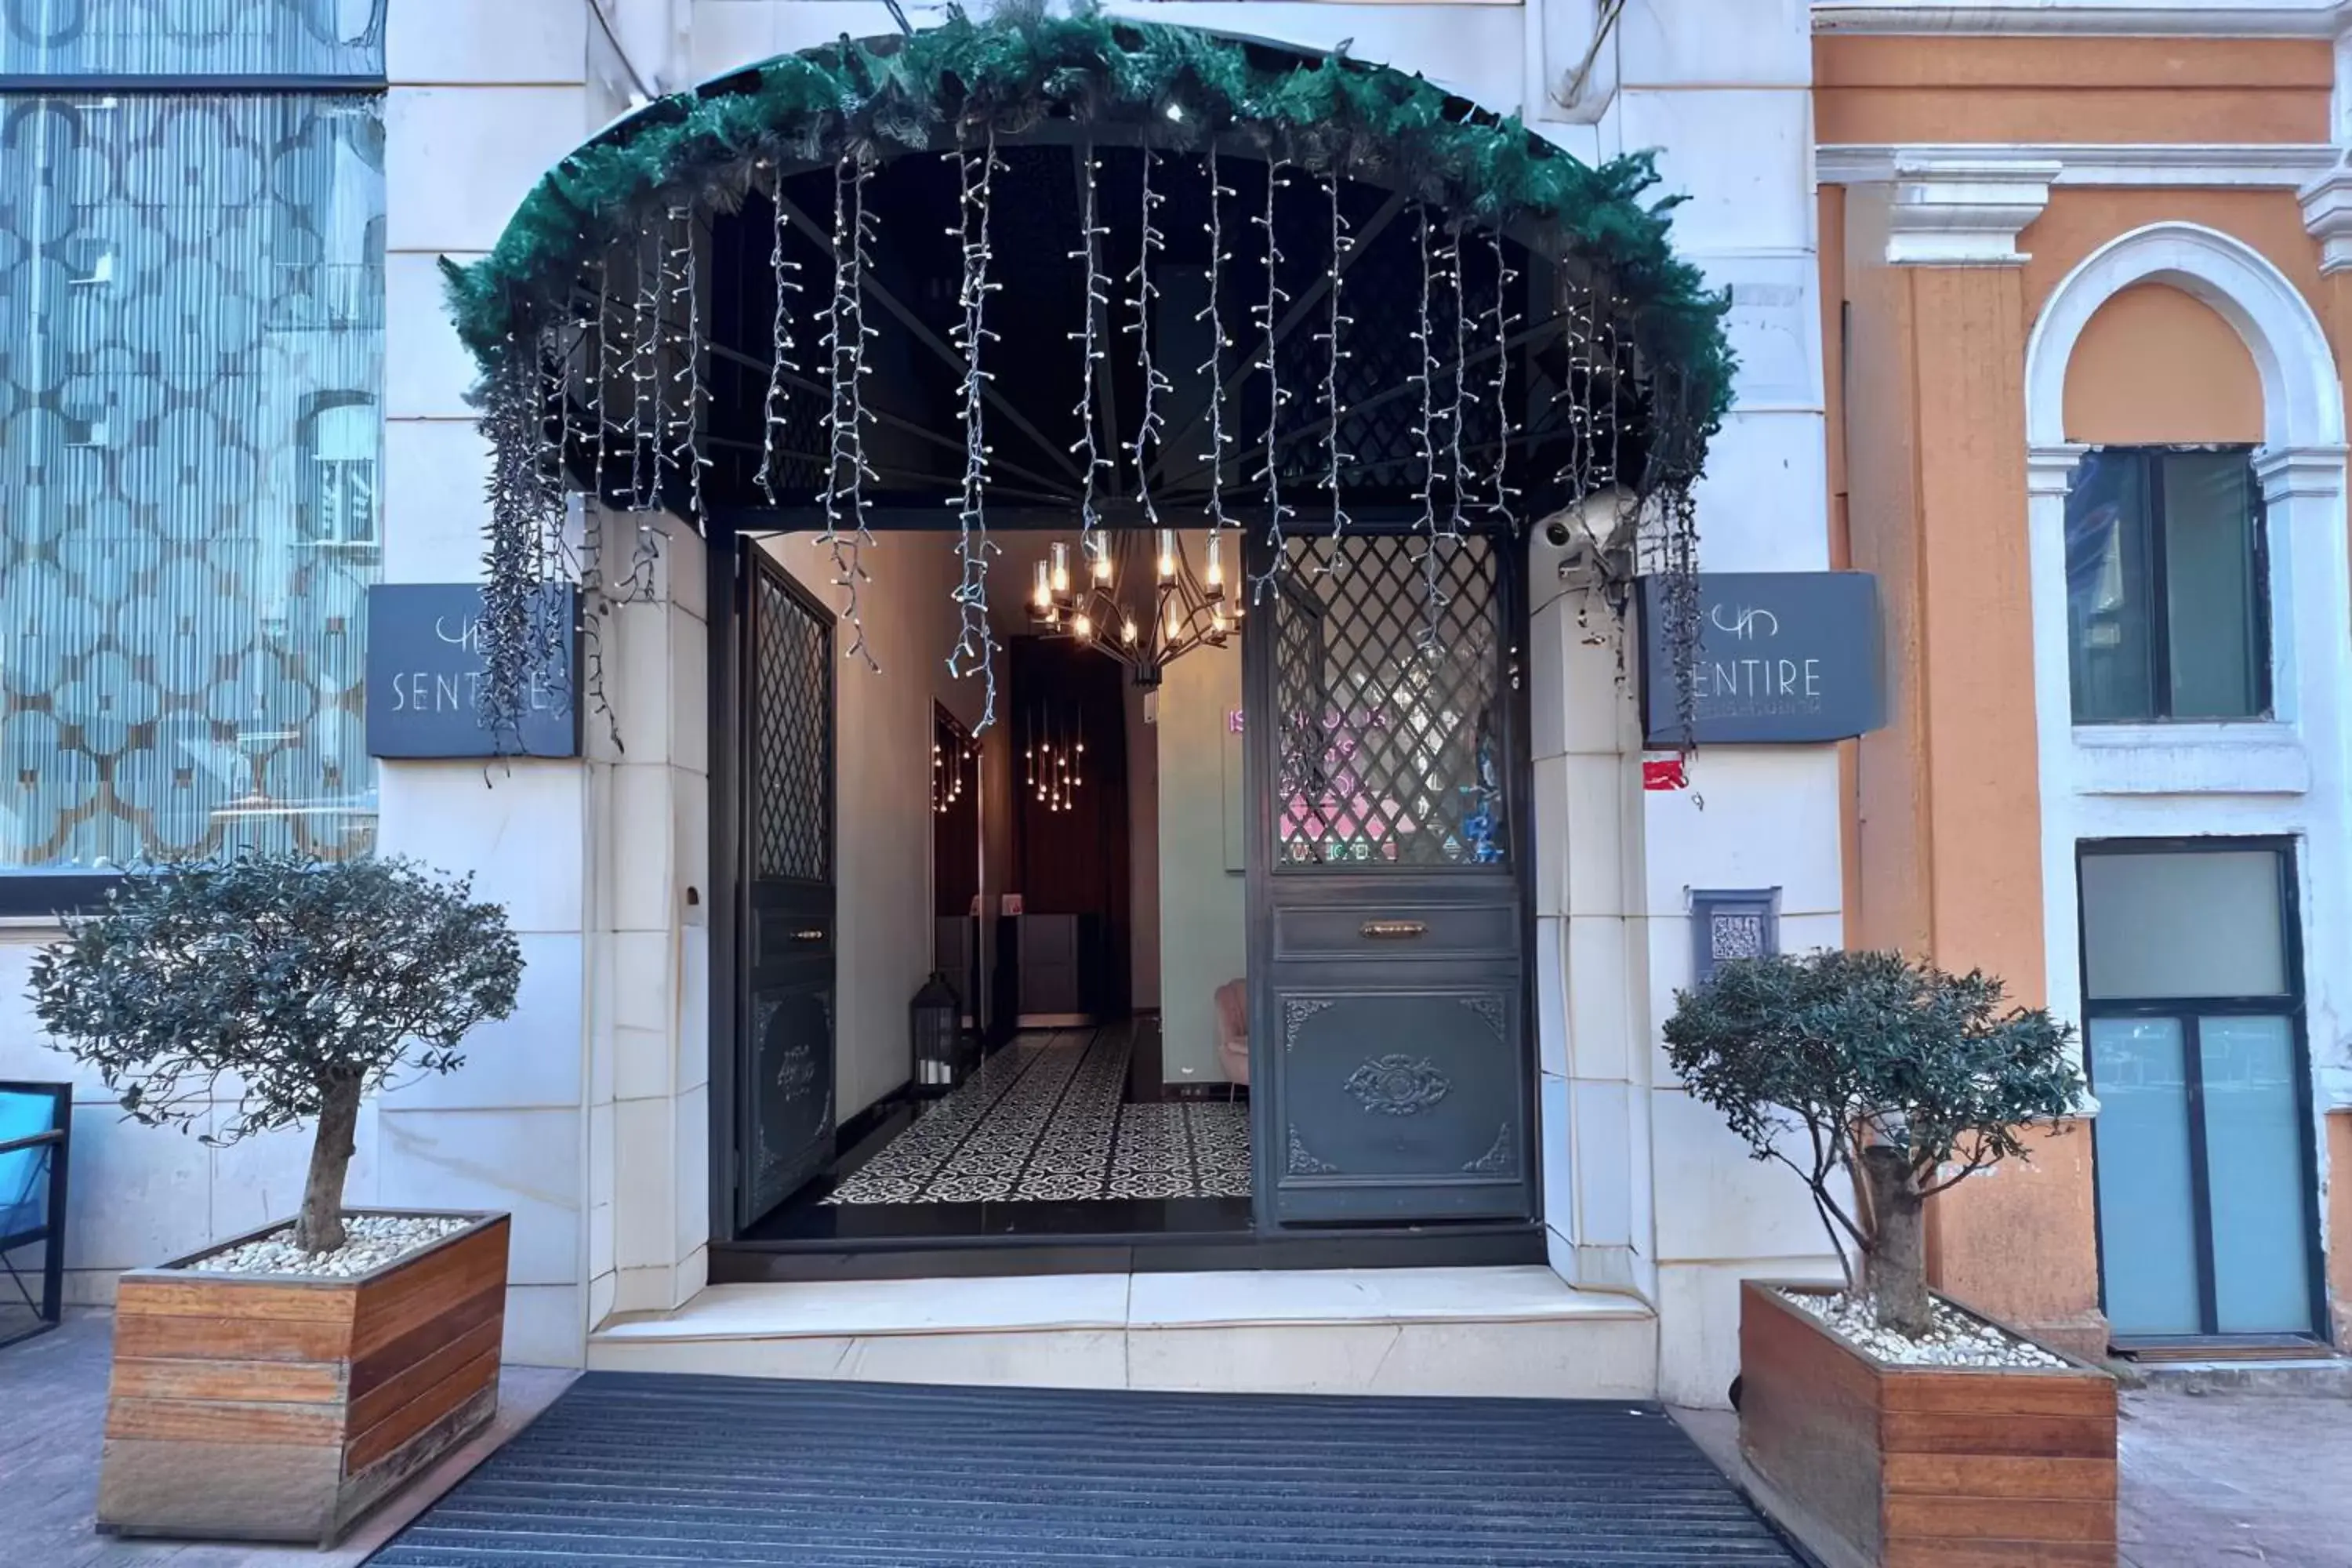 Facade/Entrance in Sentire Hotels & Residences